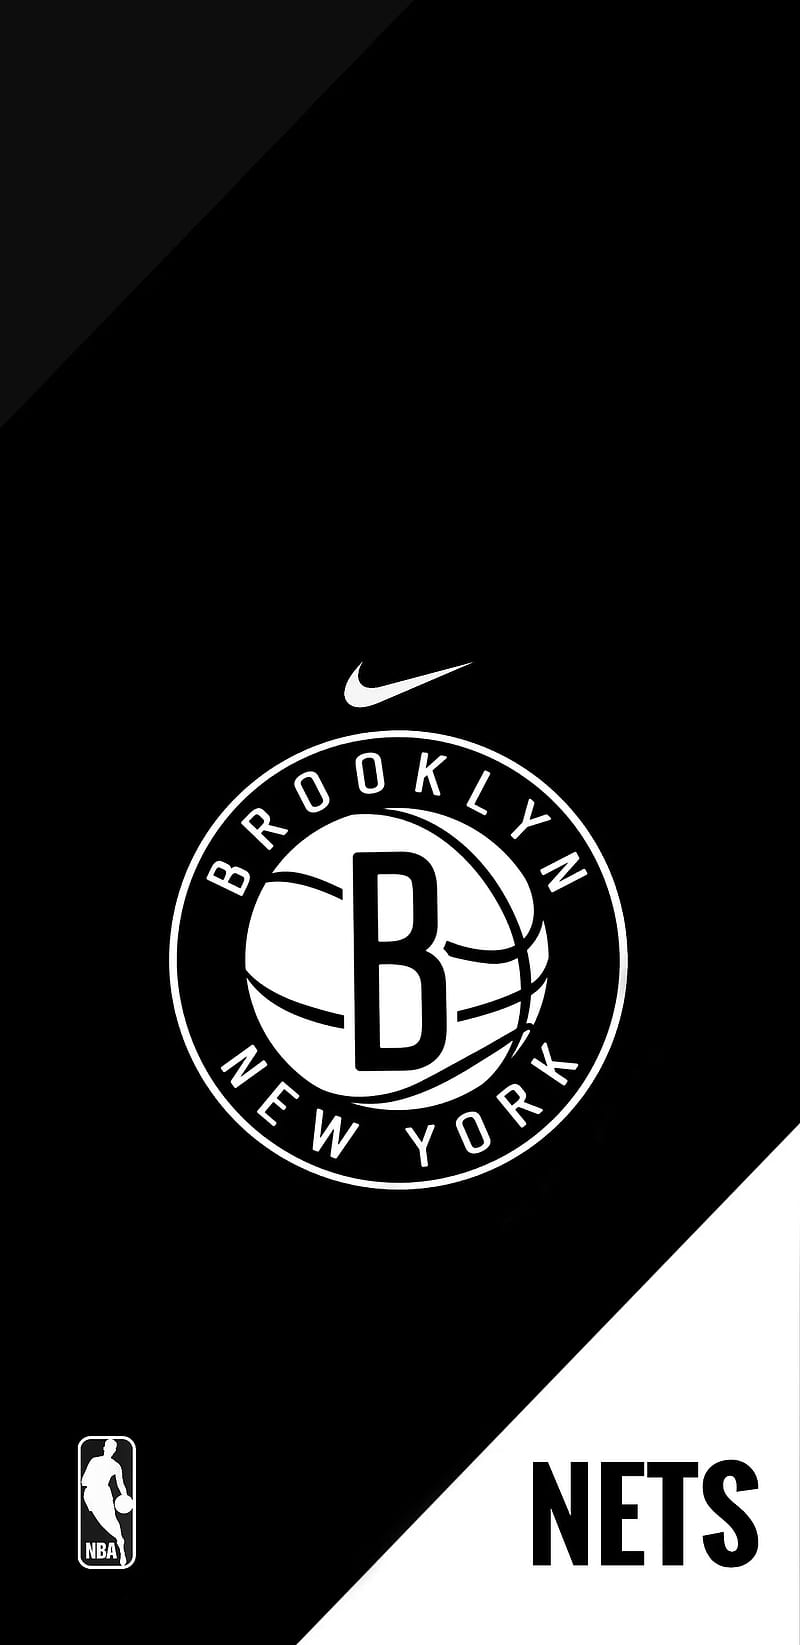 Details more than 67 brooklyn nets wallpaper - in.cdgdbentre